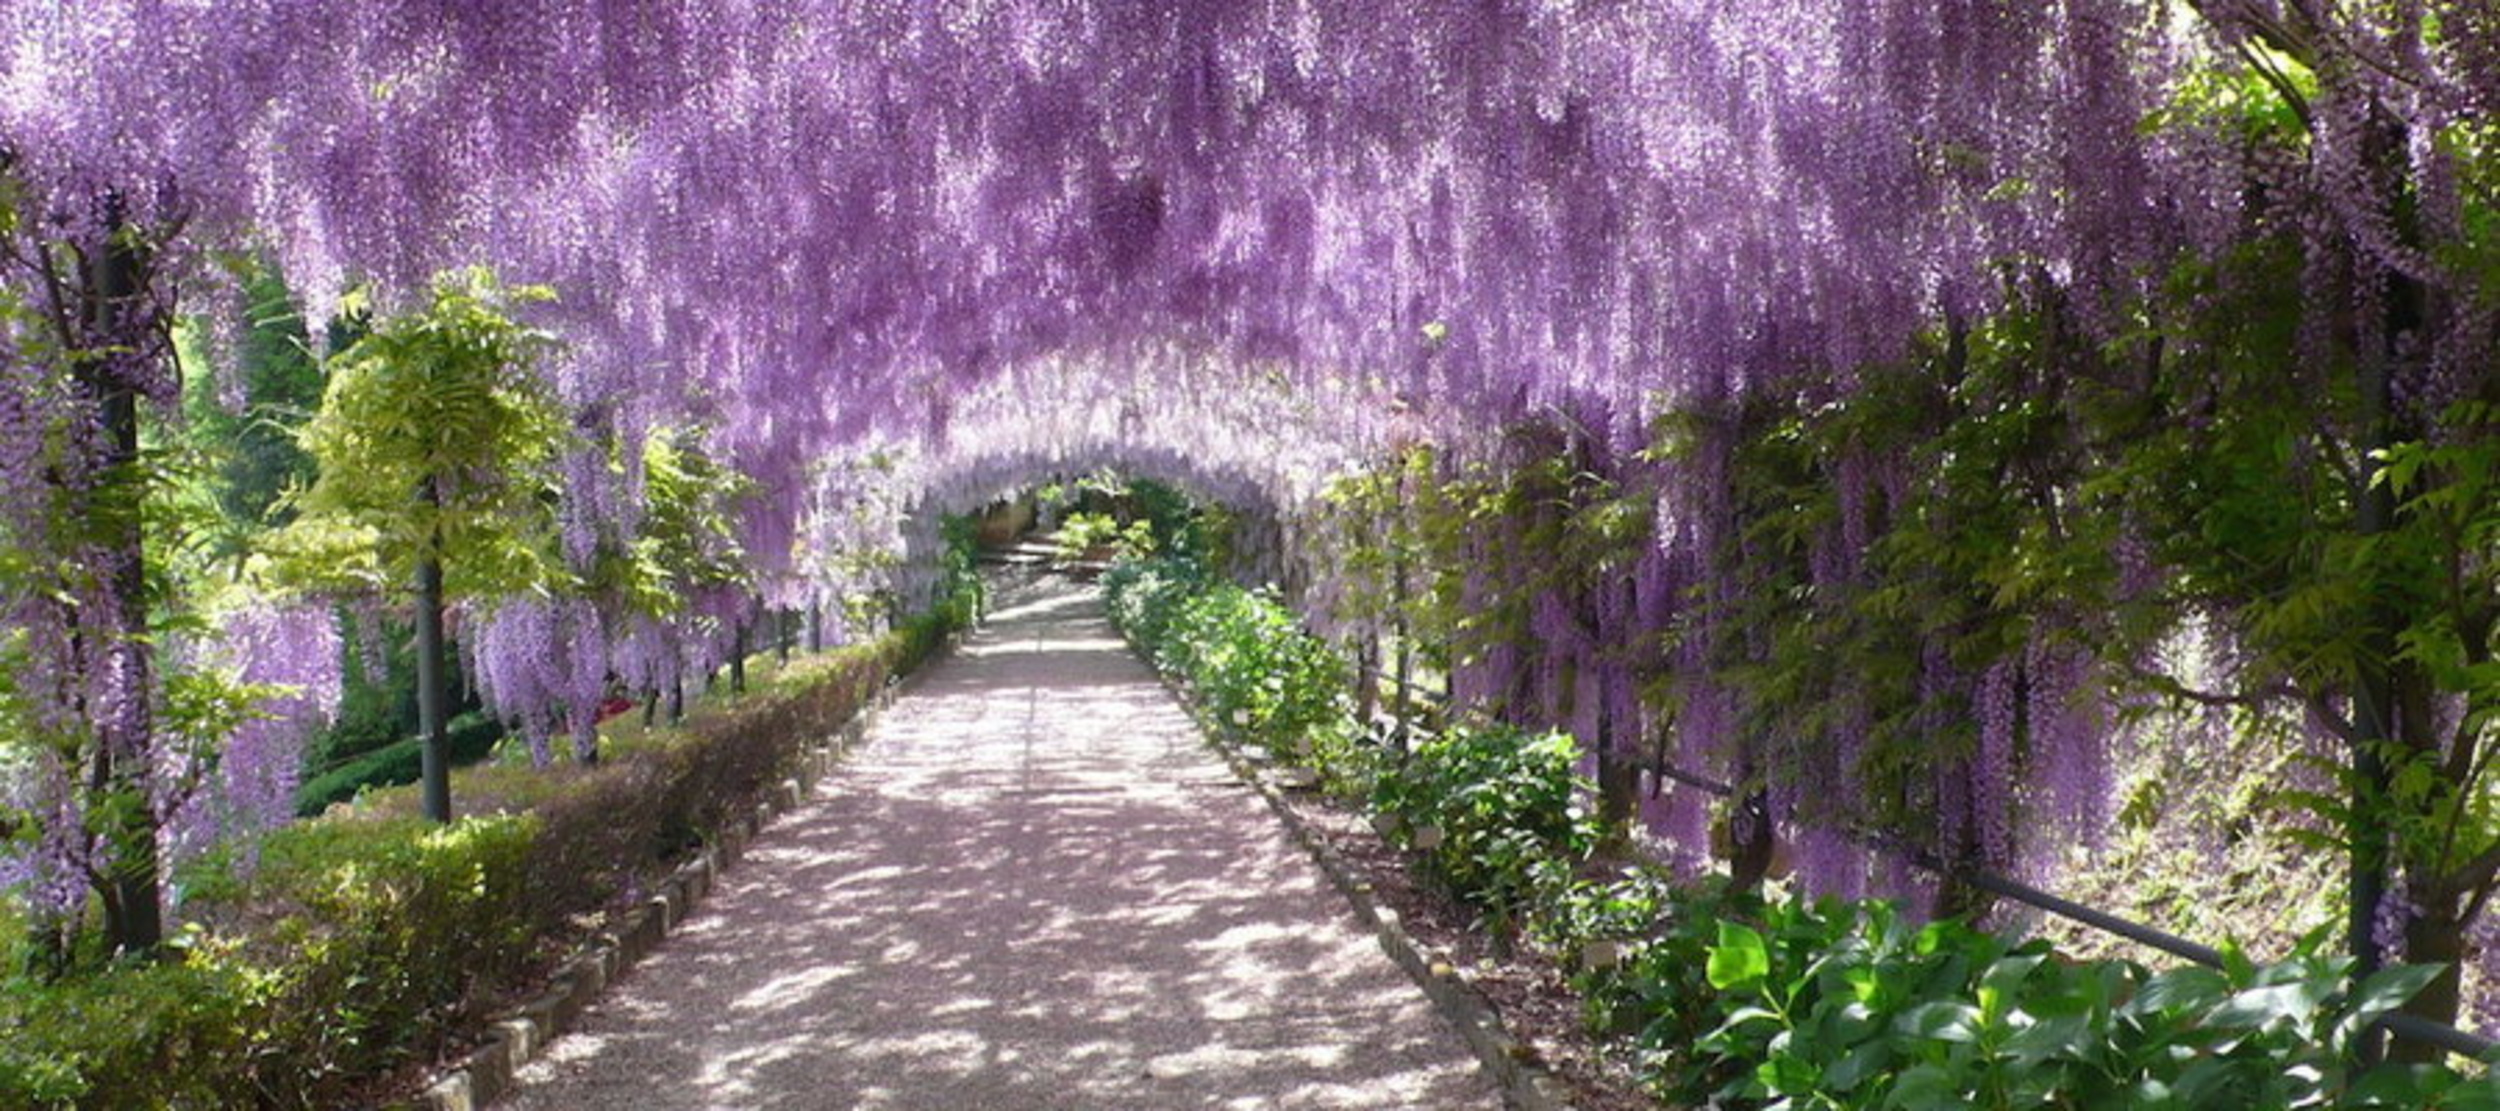 <p><span><span>If you want a slice of nature without actually going to...<em>nature</em>... there's no better place to visit than Giardino Bardini. Lined with olive groves, fountains and wisteria, everything here is tailor-made for relaxation. </span></span></p><p>You may also like: <a href='https://www.yardbarker.com/lifestyle/articles/25_of_julia_childs_most_famous_dishes_103123/s1__21500041'>25 of Julia Child's most famous dishes</a></p>